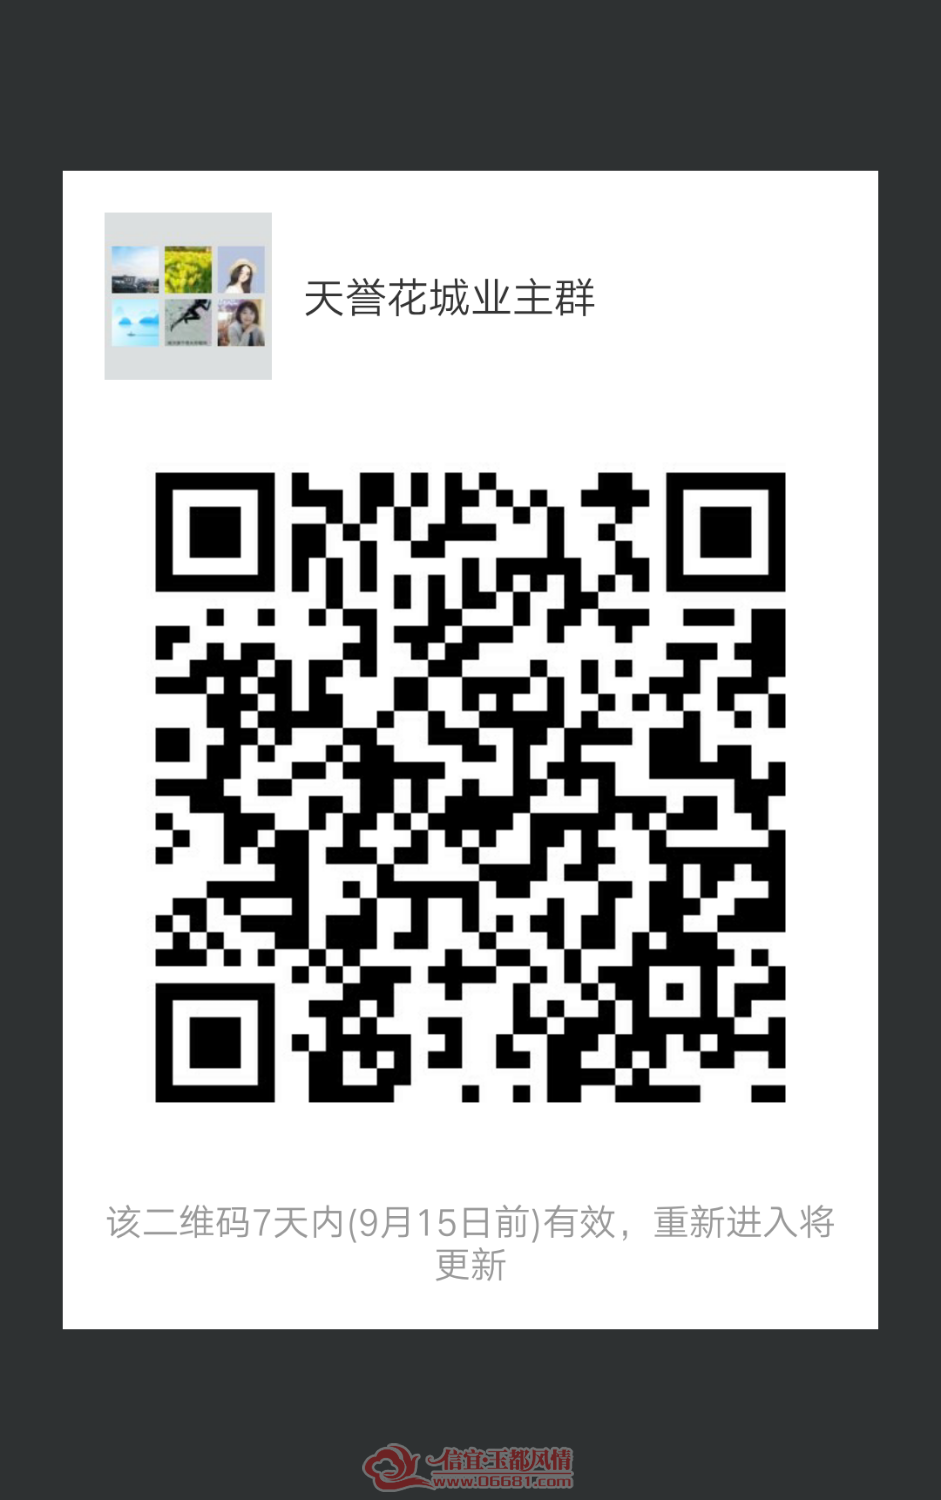 mmqrcode1536369730705.png